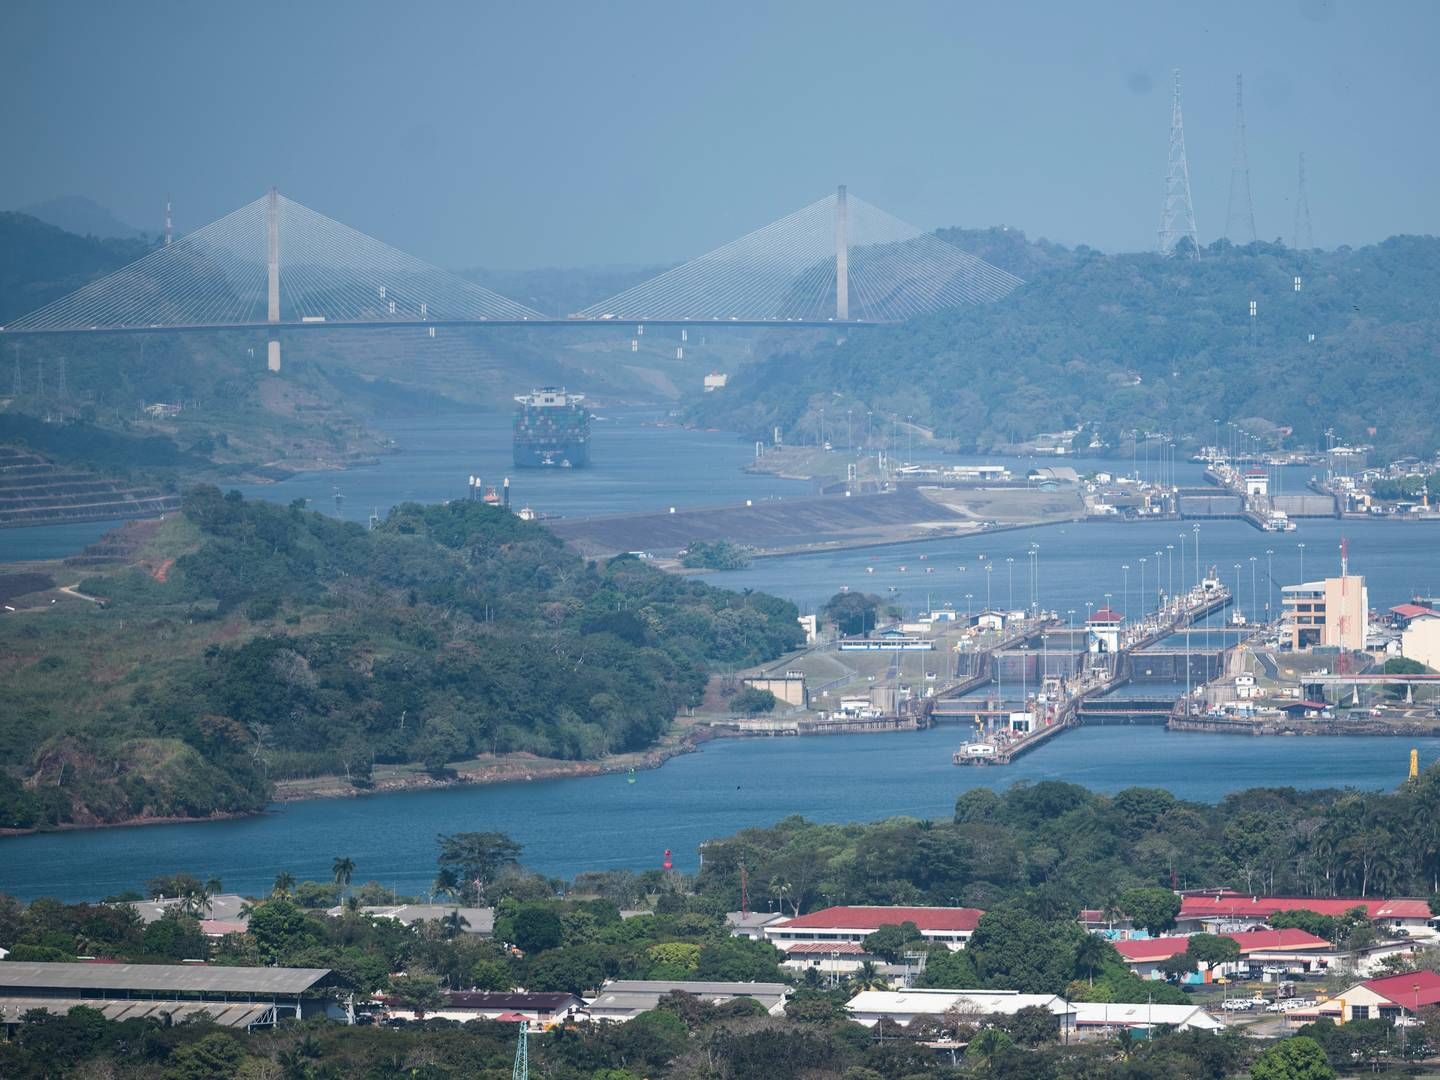 Just 24 ships a day are currently allowed to sail through the Panama Canal. | Photo: Agustin Herrera/AP/Ritzau Scanpix